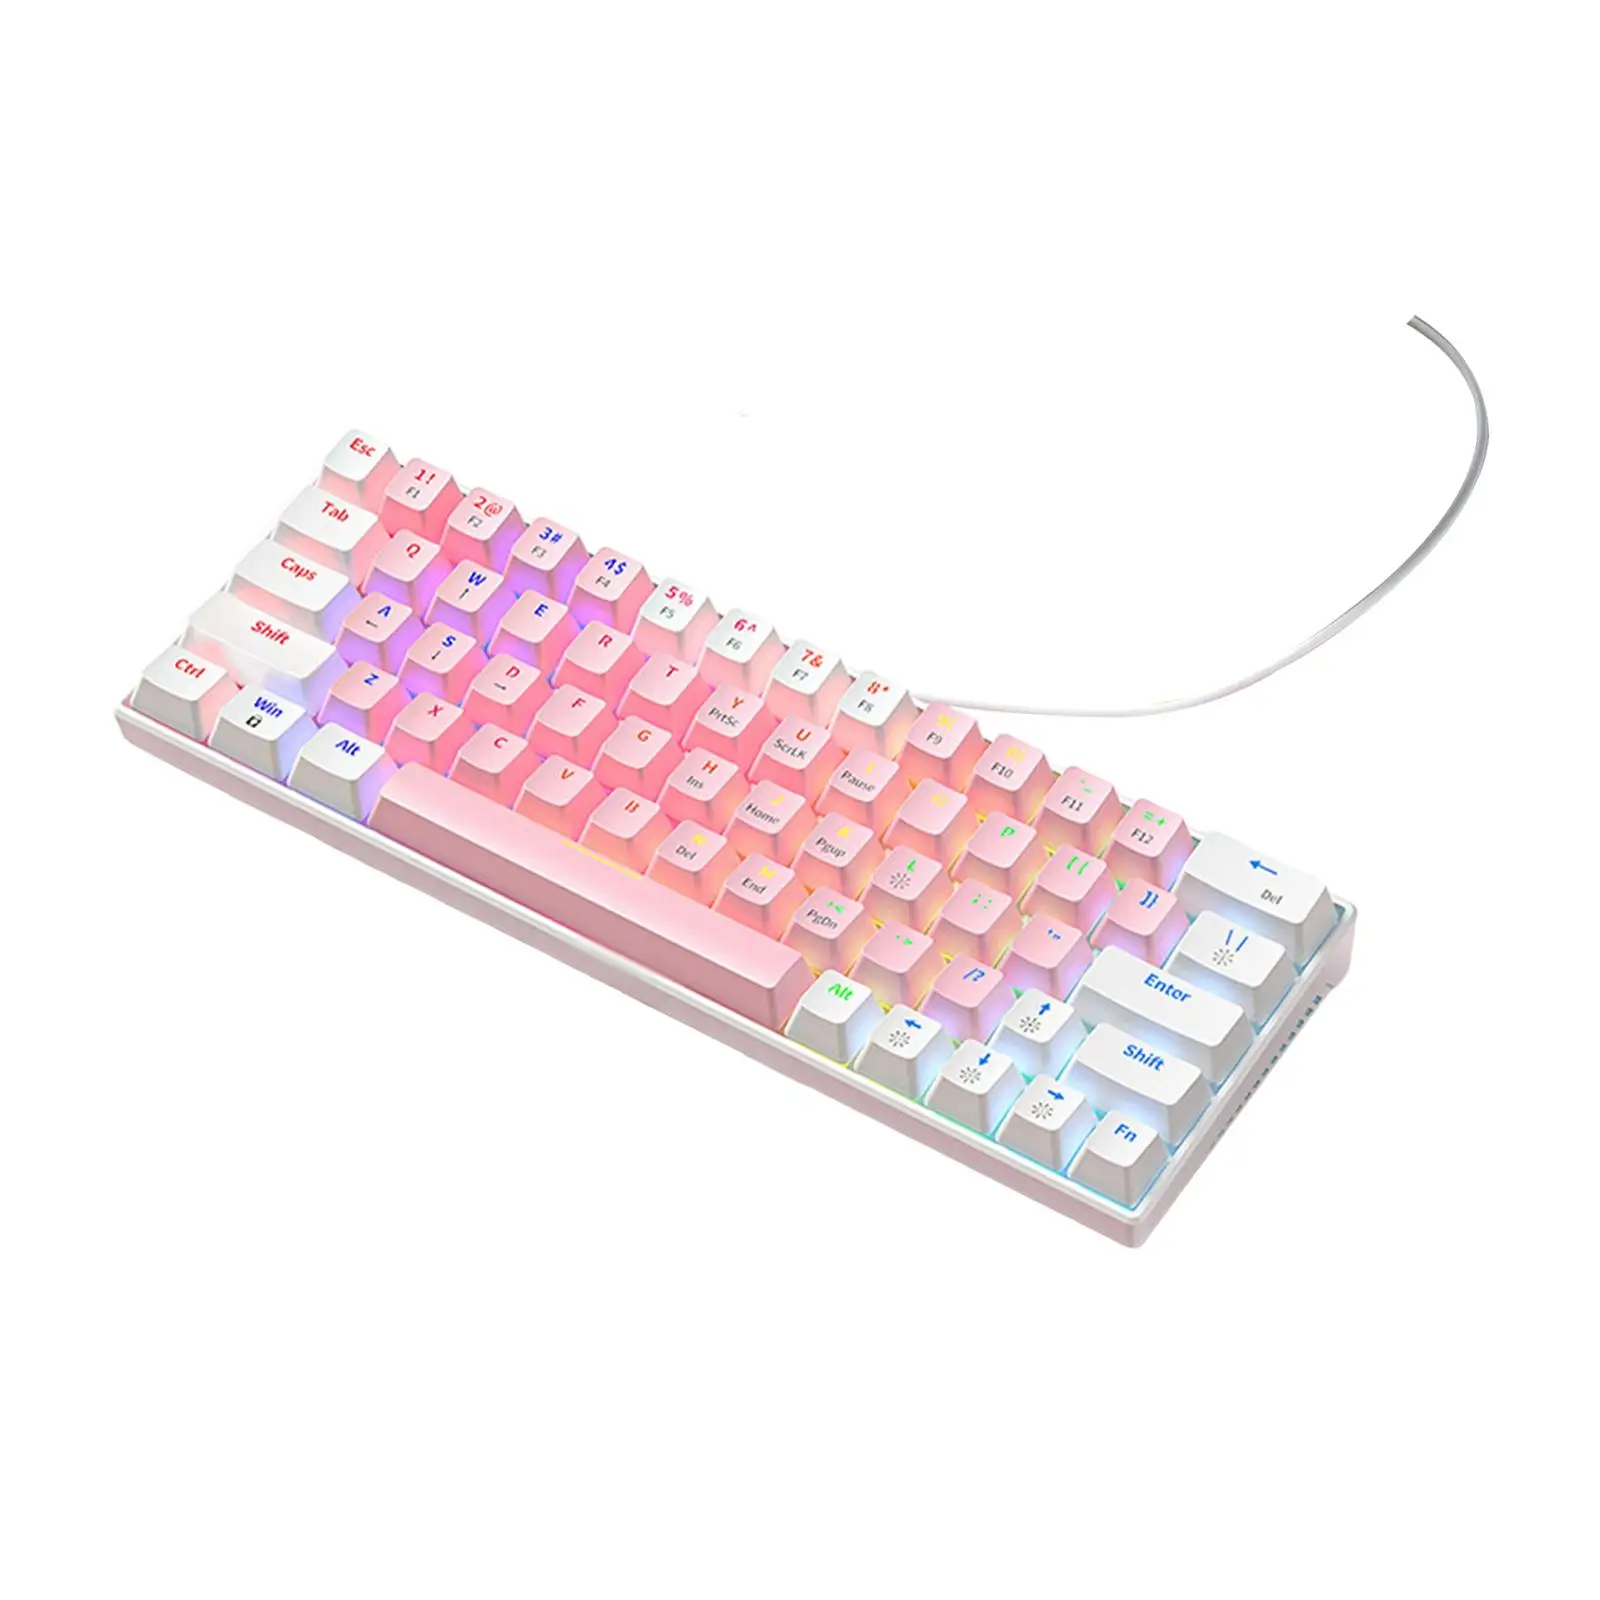 Wired Mechanical Keyboard Free Drive High and Low Support Legs Hot Swap Keyboard RGB Backlit USB Gaming Keyboard Laptop Keyboard